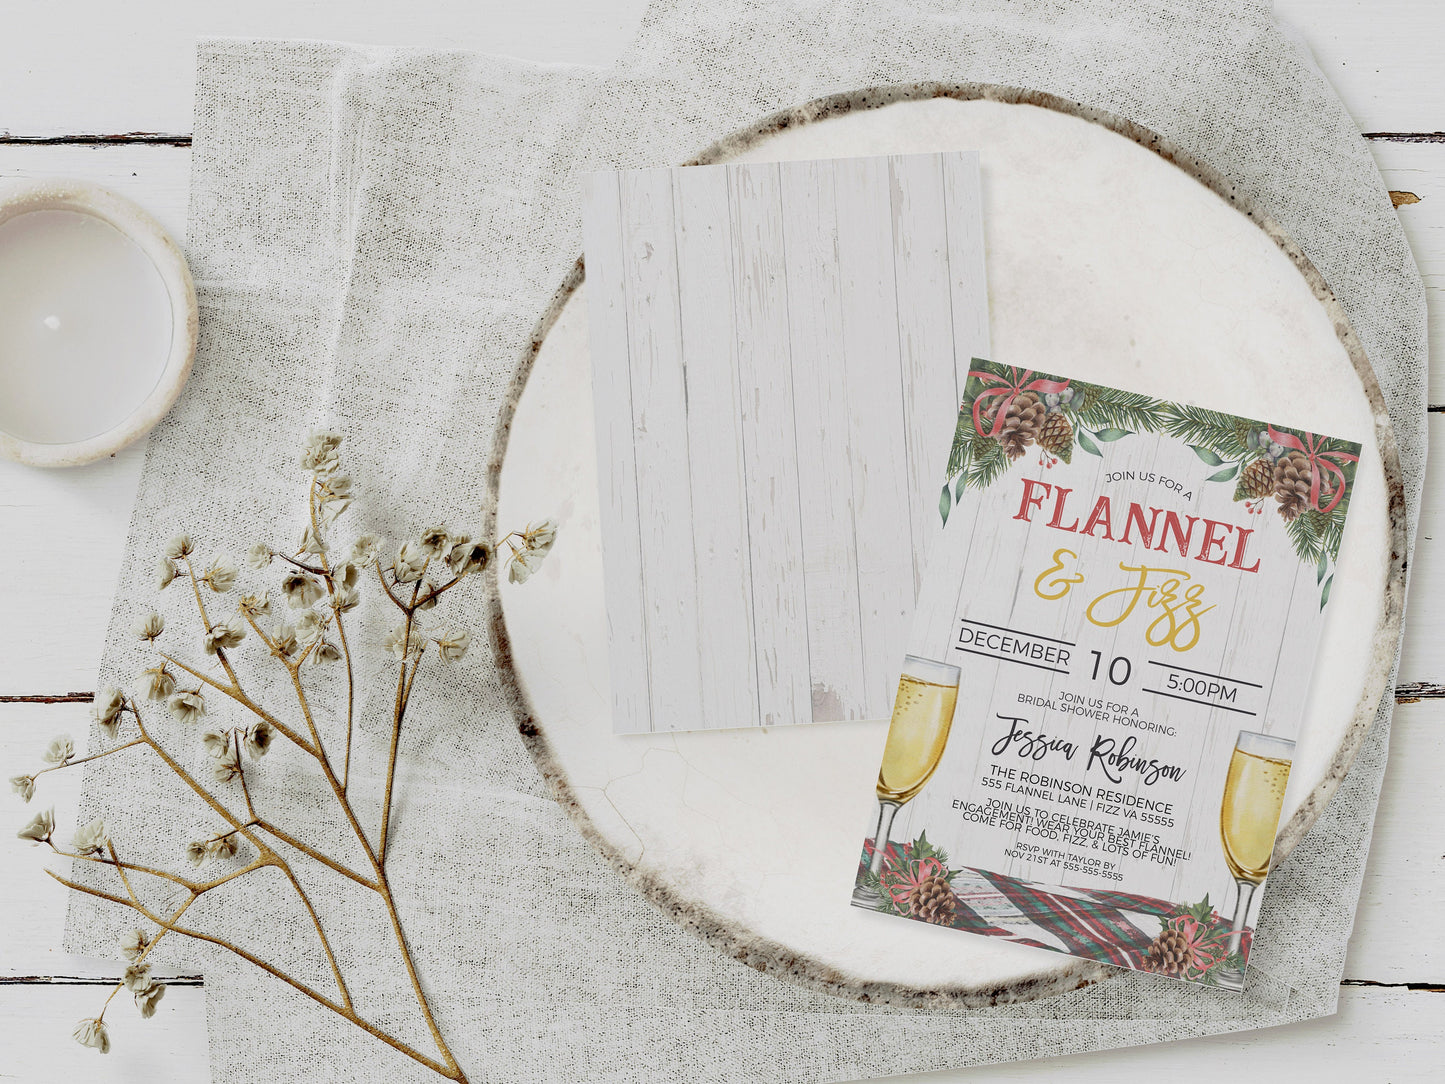 Flannel And Fizz Party Invitation, Plaid Bachelorette Invite, Flannel Fling Bridal Shower, Rustic Weekend Cabin, Editable Printable Template